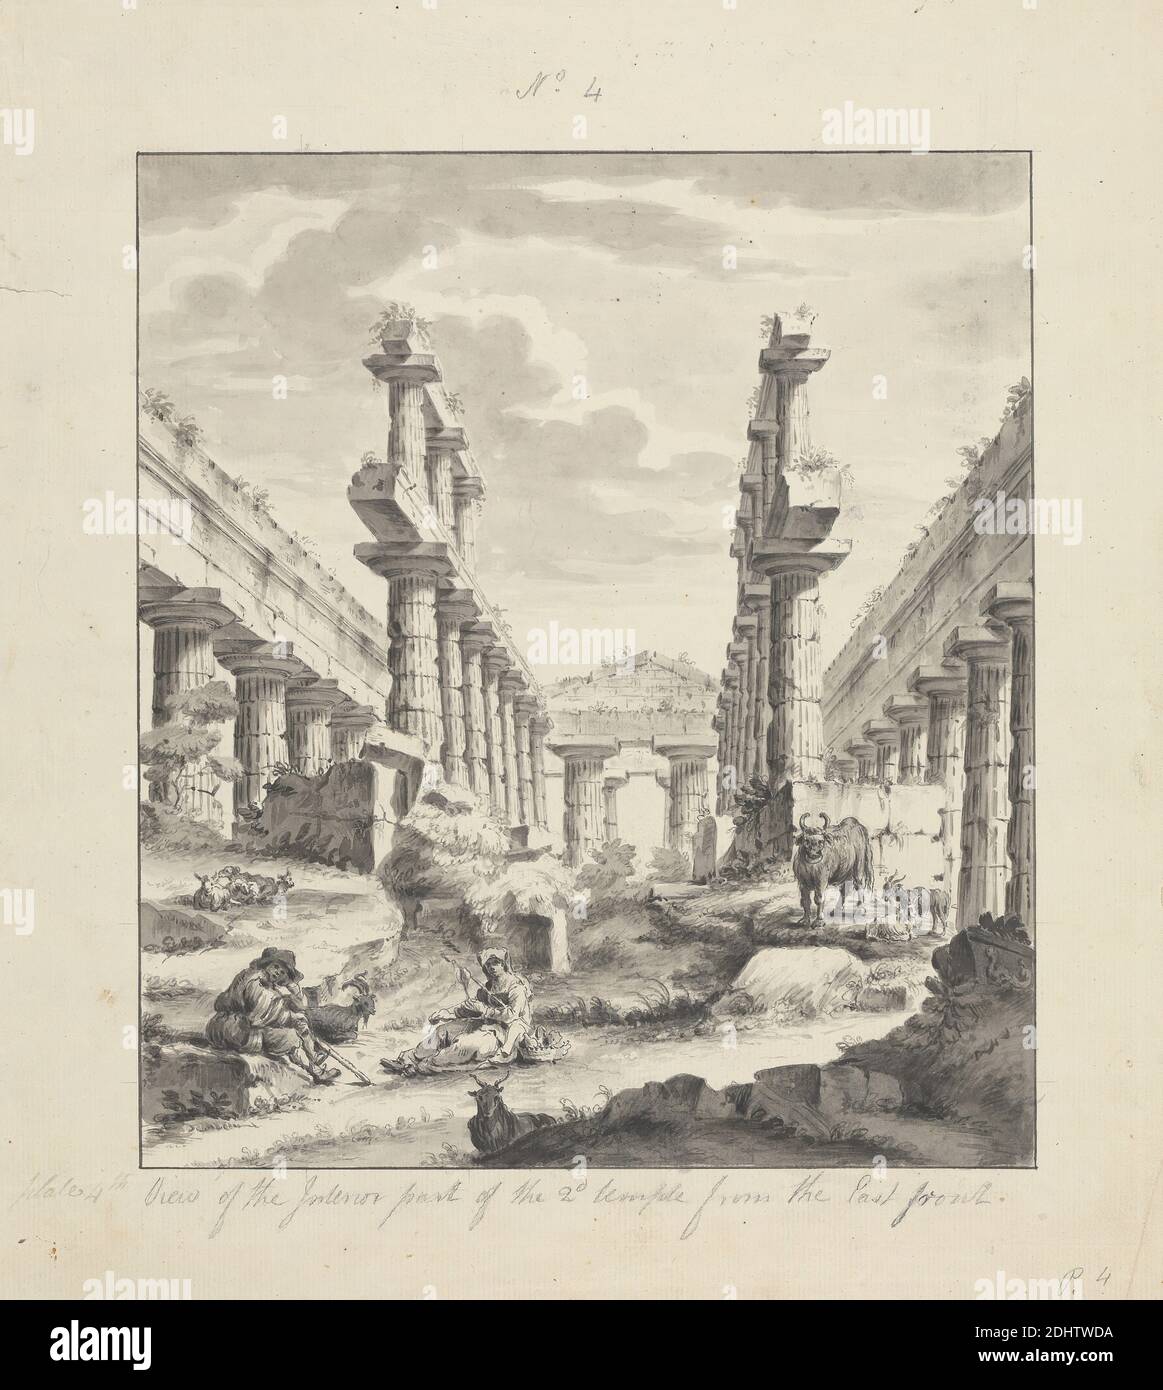 Paestum: No. 4 View of the Interior part of the 2nd temple from the east front, James Bruce, 1730–1794, British, undated, Gray wash over graphite on meidum, slightly textured, cream laid paper, Sheet: 13 1/2 x 11 7/8 inches (34.3 x 30.2 cm), animals, architectural subject, cattle, Classical, columns (architectural elements), Doric order, figures (representations), goats, interior, ruins, temples, Paestum Stock Photo